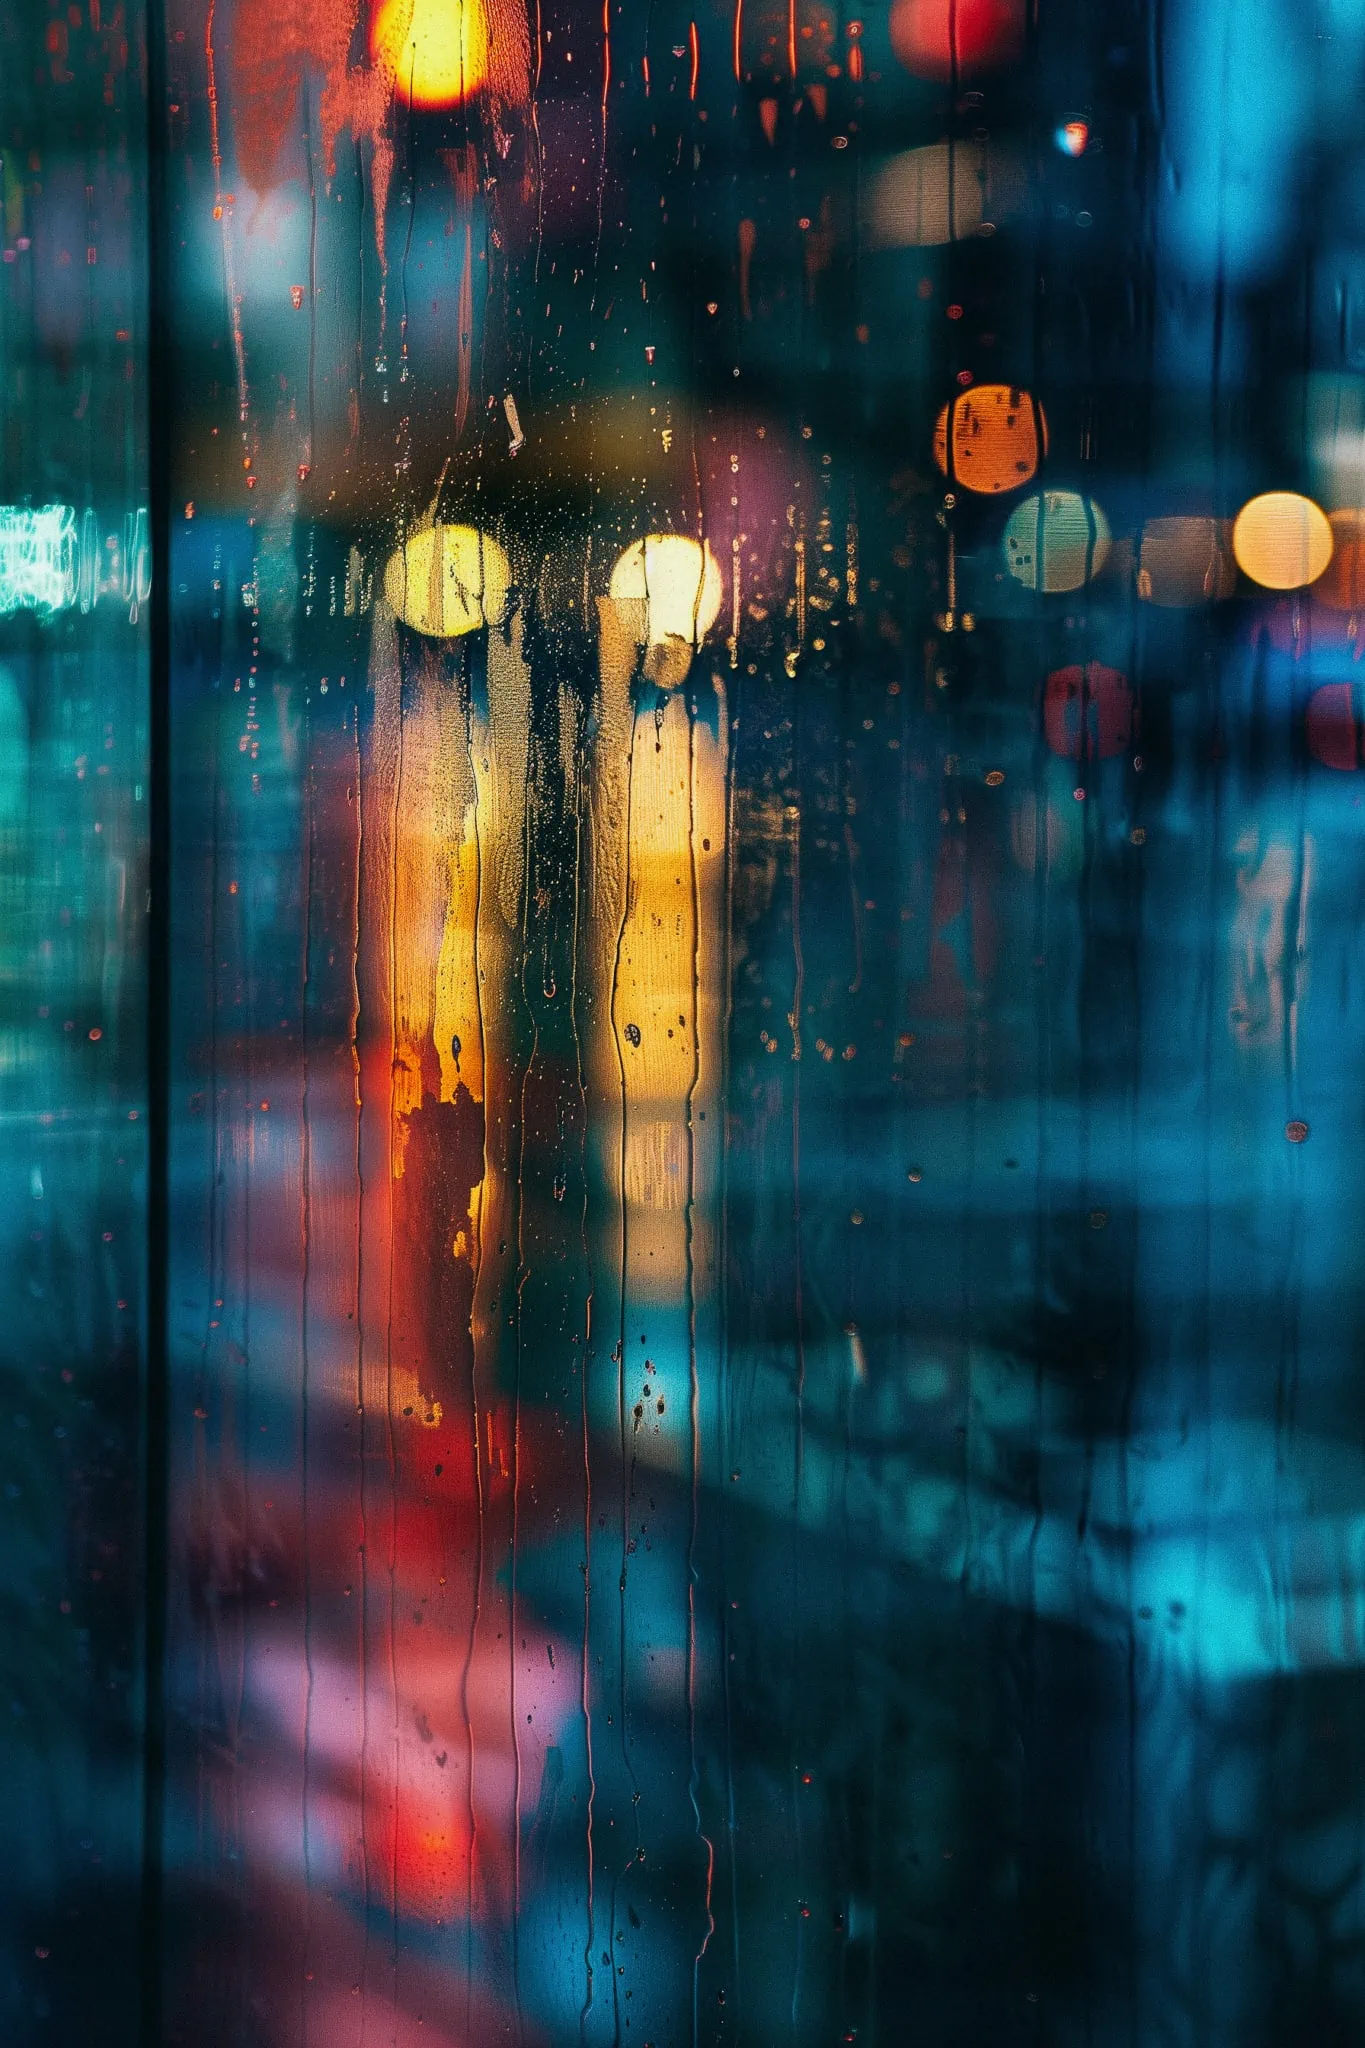 City Lights through a Water-Streaked Window | Free Stock Image - Barnimages